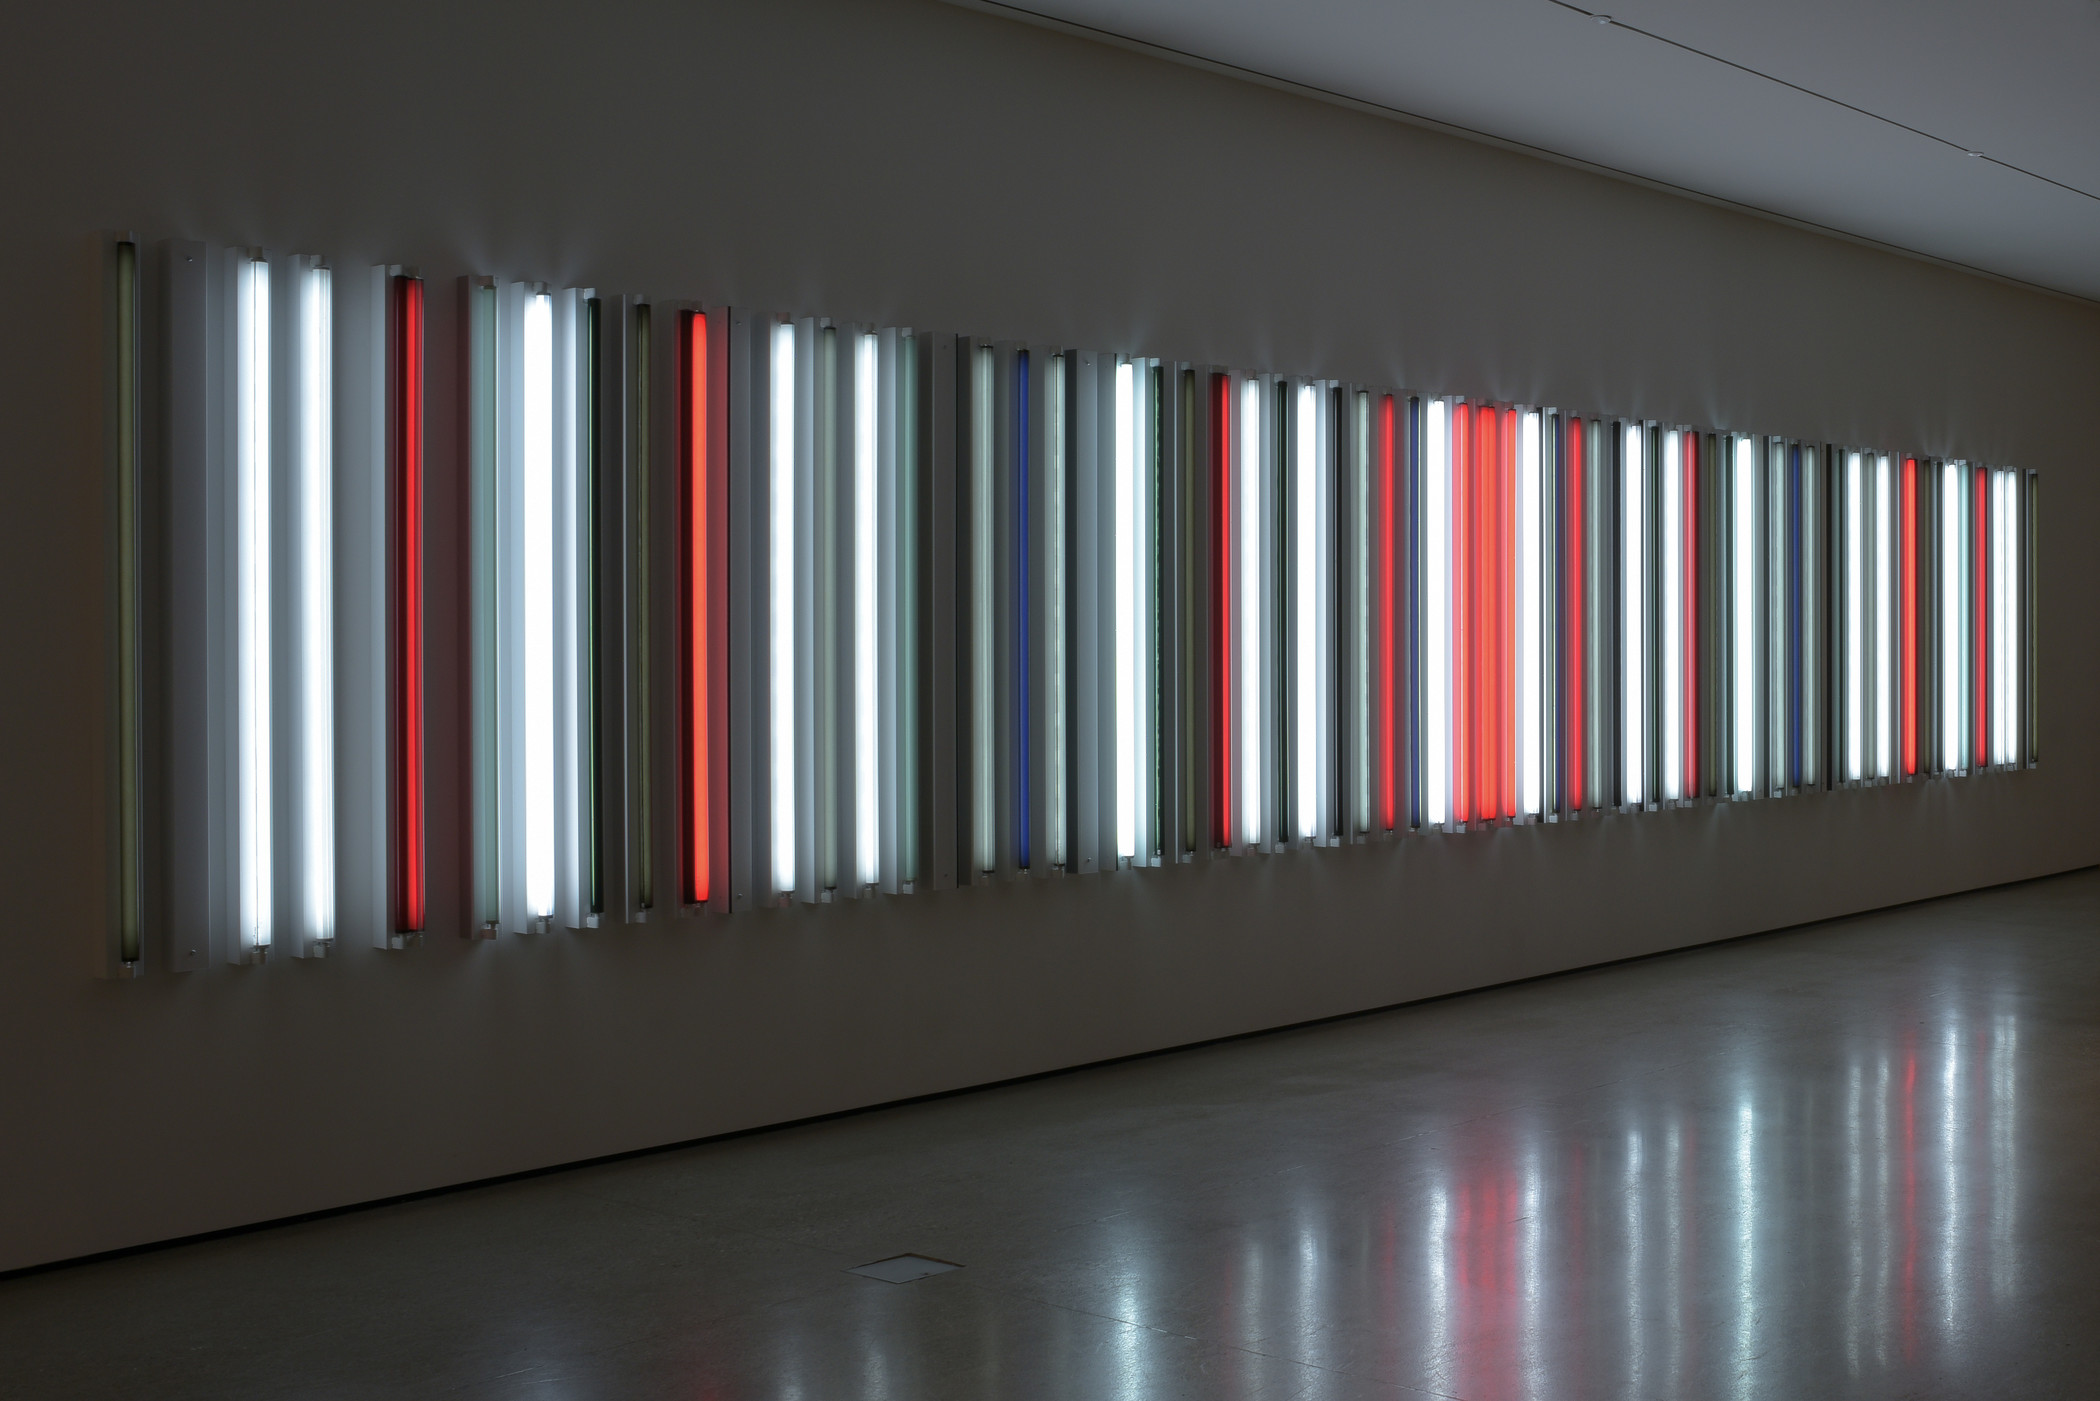 Glowing red, white, blue neon tubes comprising an artwork